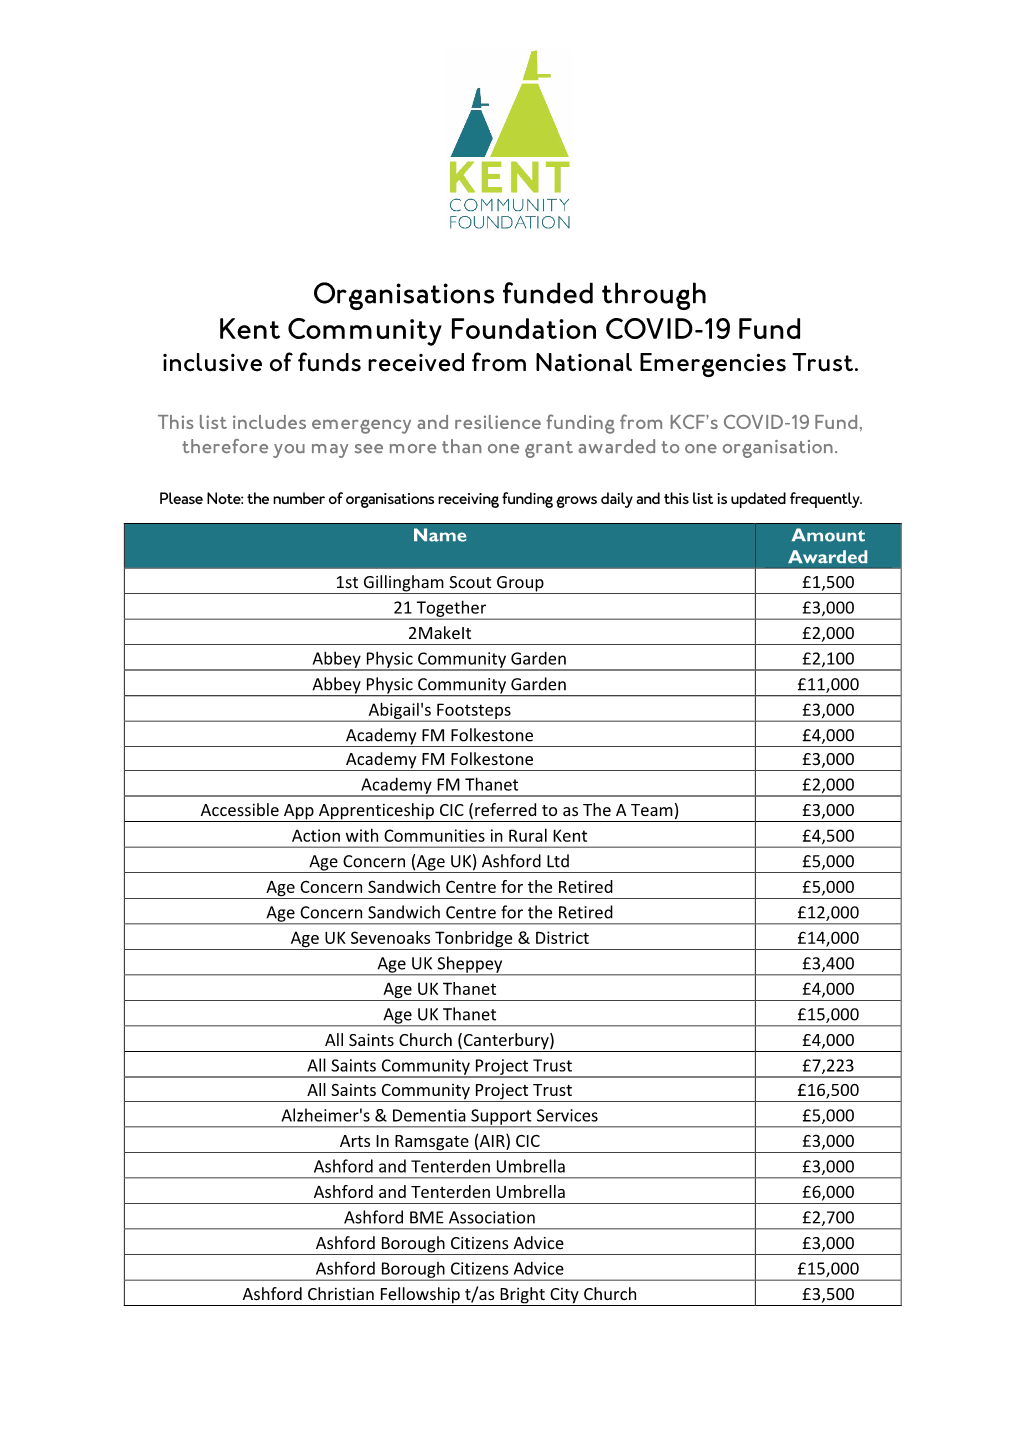 Organisations Funded Through Kent Community Foundation COVID-19 Fund Inclusive of Funds Received from National Emergencies Trust